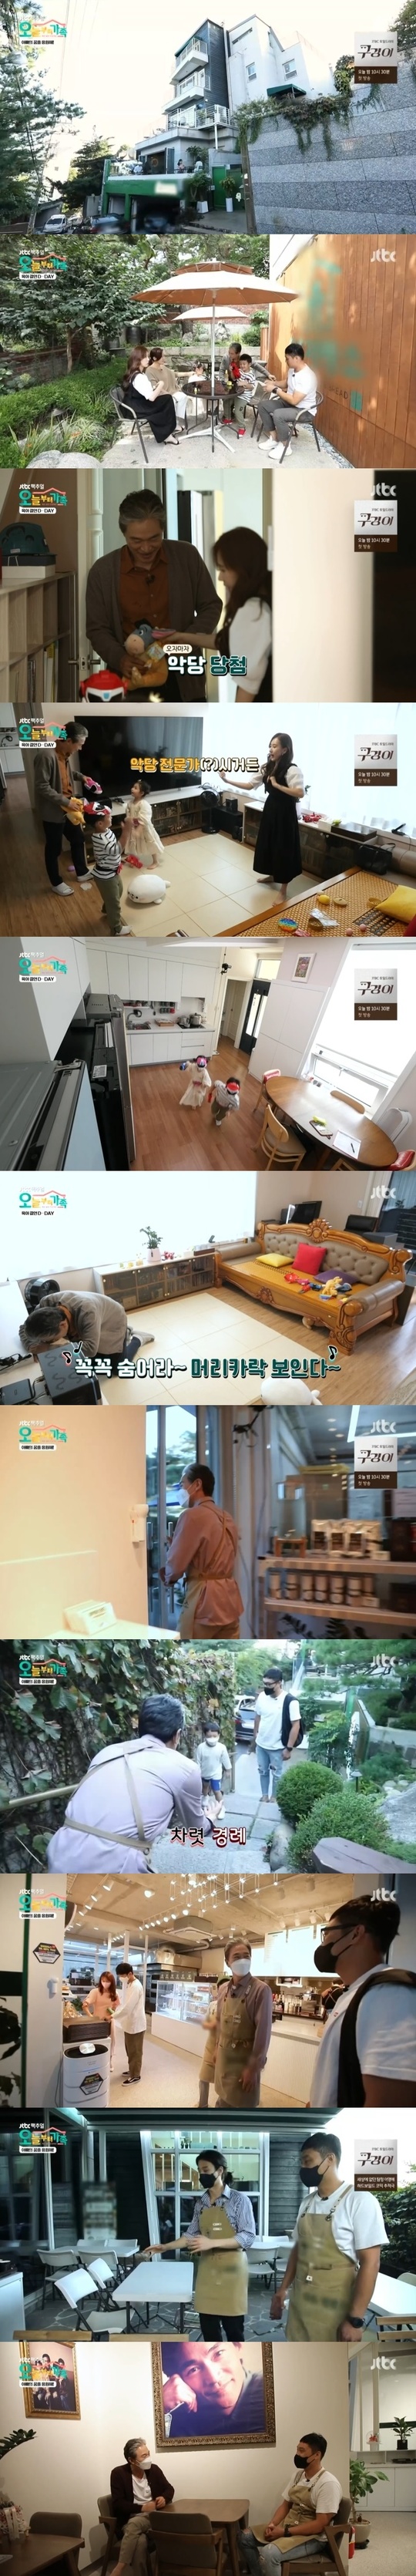 A 120-pyeong bakery has been unveiled, which has renovated the house in Actor Jeong Bo-Seok.In the second episode of JTBCs current affairs liberal arts program JTBC FACTUAL - Family from Today (hereinafter referred to as Family from Today), which aired on October 30, the Jeong Bo-seok and Ki Min-jung couple challenged the co-parents, and formed a relationship with the single-parent family Han Ji Hoon - pre-post-Wester rich.On this day, Jeong Bo-seok and Kim Min-jung invited Ji Hoon and pre-post-wester to their bakery and house and spent valuable time building various memories.The couple took care of Mr. Ji-hoon with Granddaughter, who was pre-post-wester when he worked.Jeong Bo-seok was a joyful villain, playing with children and running around the house and playing catch.In addition, Jeong Bo-seok has created a special opportunity for Ji Hoon, who dreams of making a future bakery Cafe.Ji-hoon has been able to work directly at his bakery. Jin Bo-seok said he is also hudret work because he does not have a baking and barista chain, and Ji-hoon said, I think it would be nice to have an experience in our cafe.Ji Hoon, who has experienced various chores of Jeong Bo-Seok, said, I thought that if I was a Cafe operation, I would have to make coffee and make bread well, but I should not worry about it.